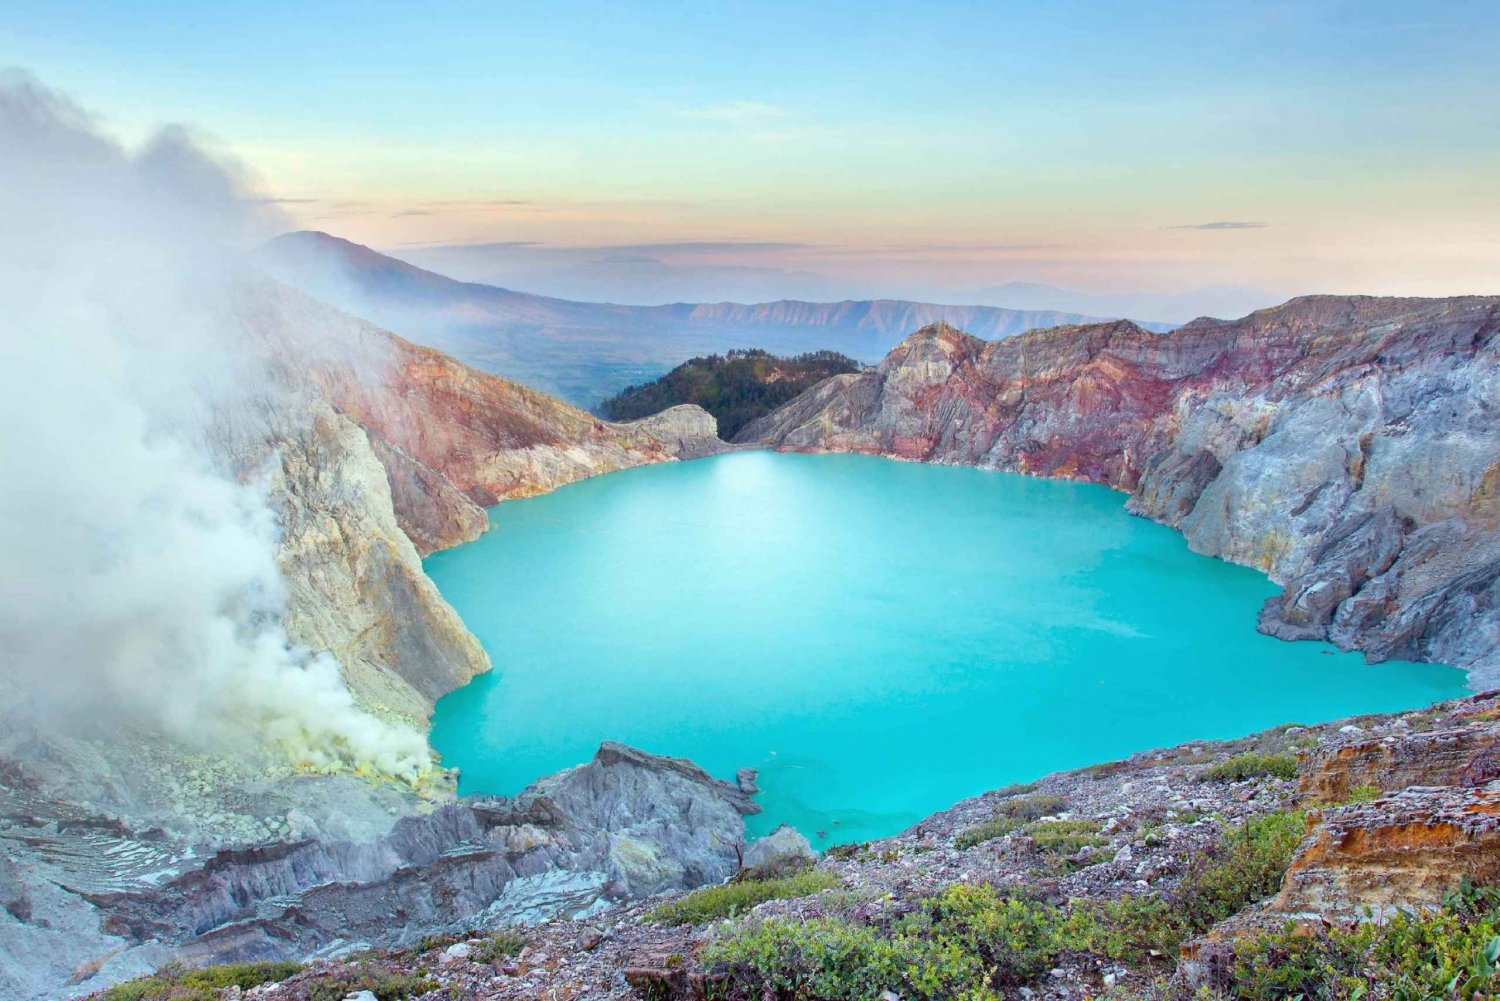 Bali: Mount Bromo and Ijen Crater's Blue Fire 3-Day Tour